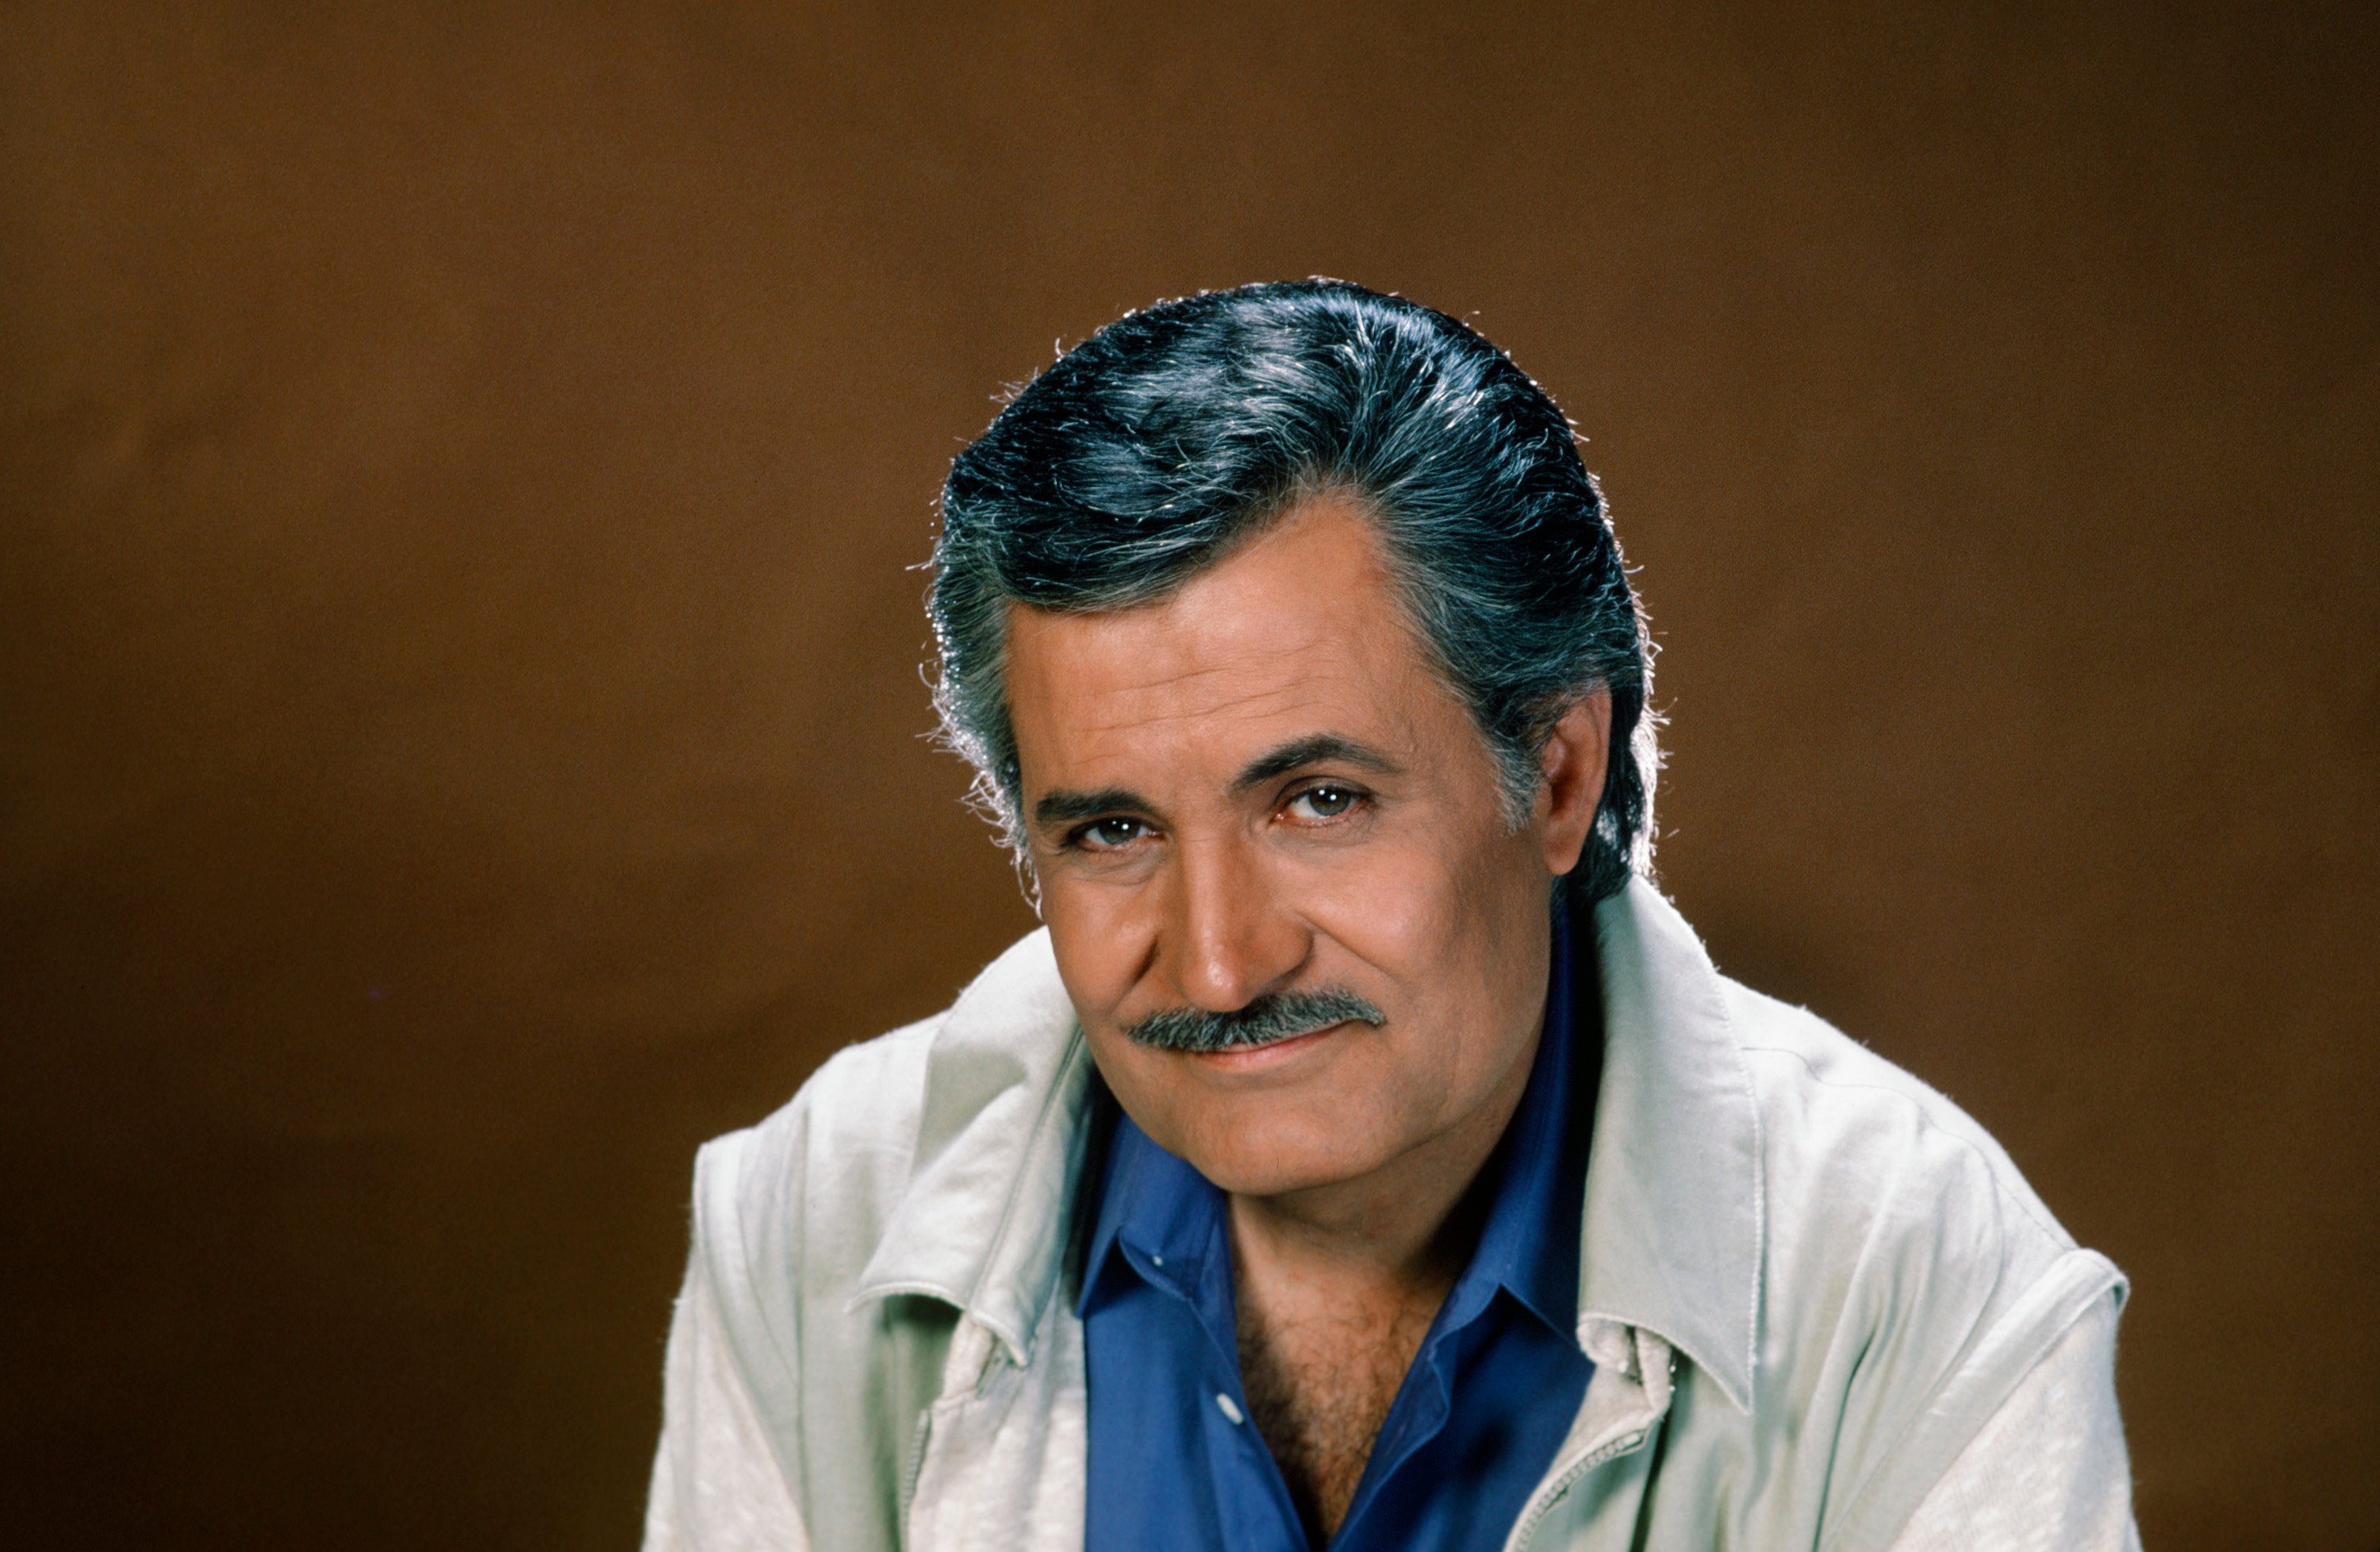 What Was John Aniston’s Net Worth at the Time of His Death?